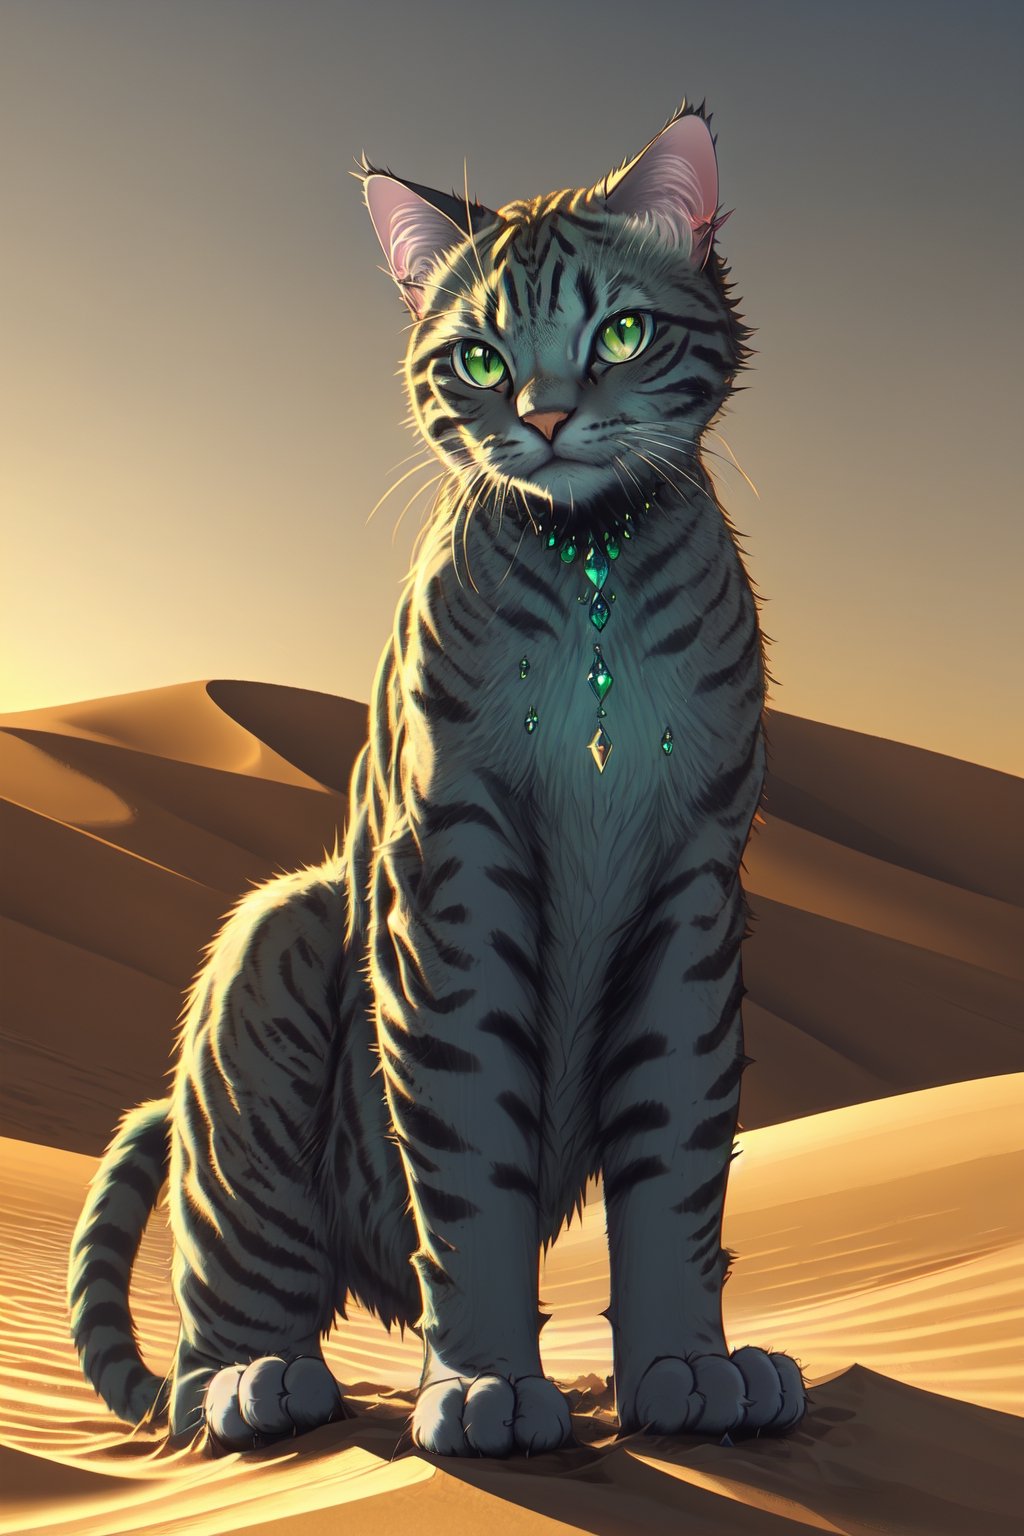 A majestic feline poses against a warm, sandy dune backdrop, its piercing green eyes fixed intently on something in the distance. The cat's fur shines like polished sapphires, with subtle blue undertones catching the soft, golden light of the setting sun. The framing is tight, focusing attention on the cat's regal demeanor and striking gaze.,Detail,finger frame